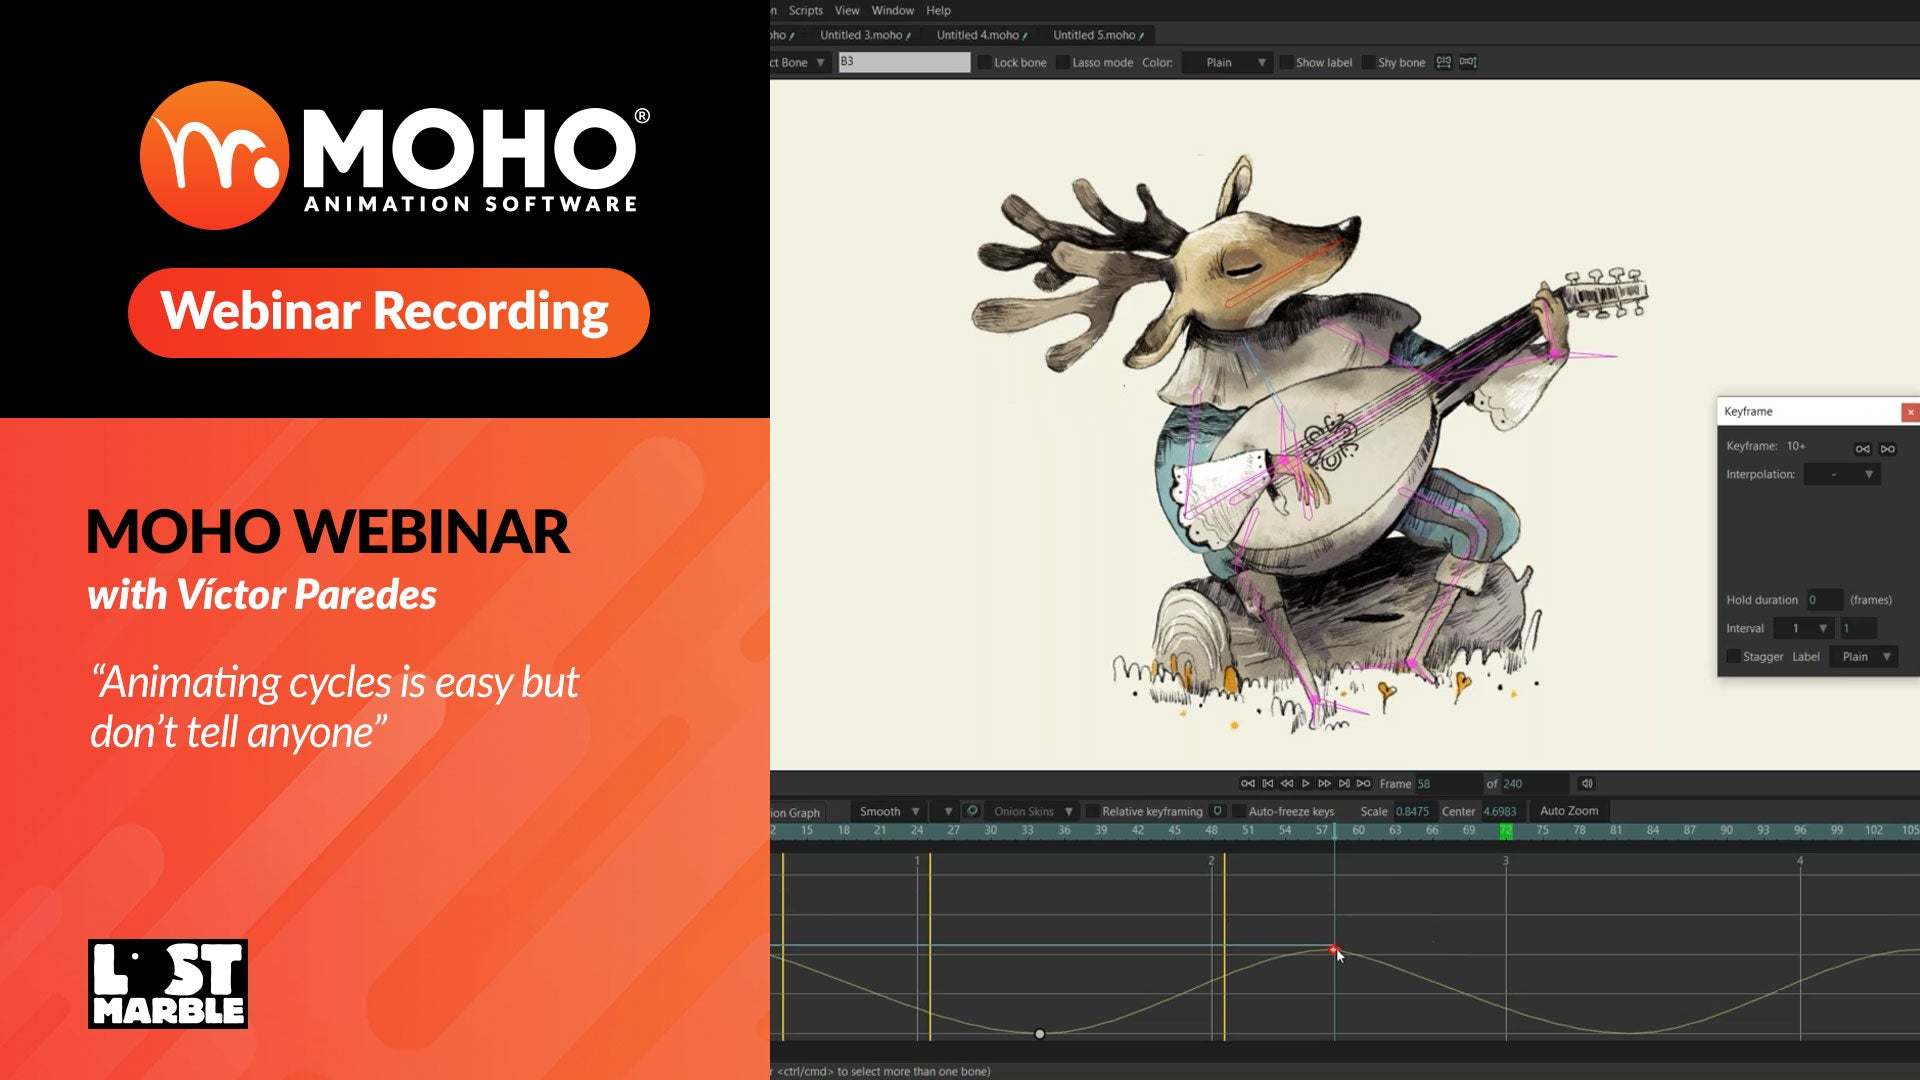 Webinar recording: Animating cycles is easy but don't tell anyone with Víctor Paredes